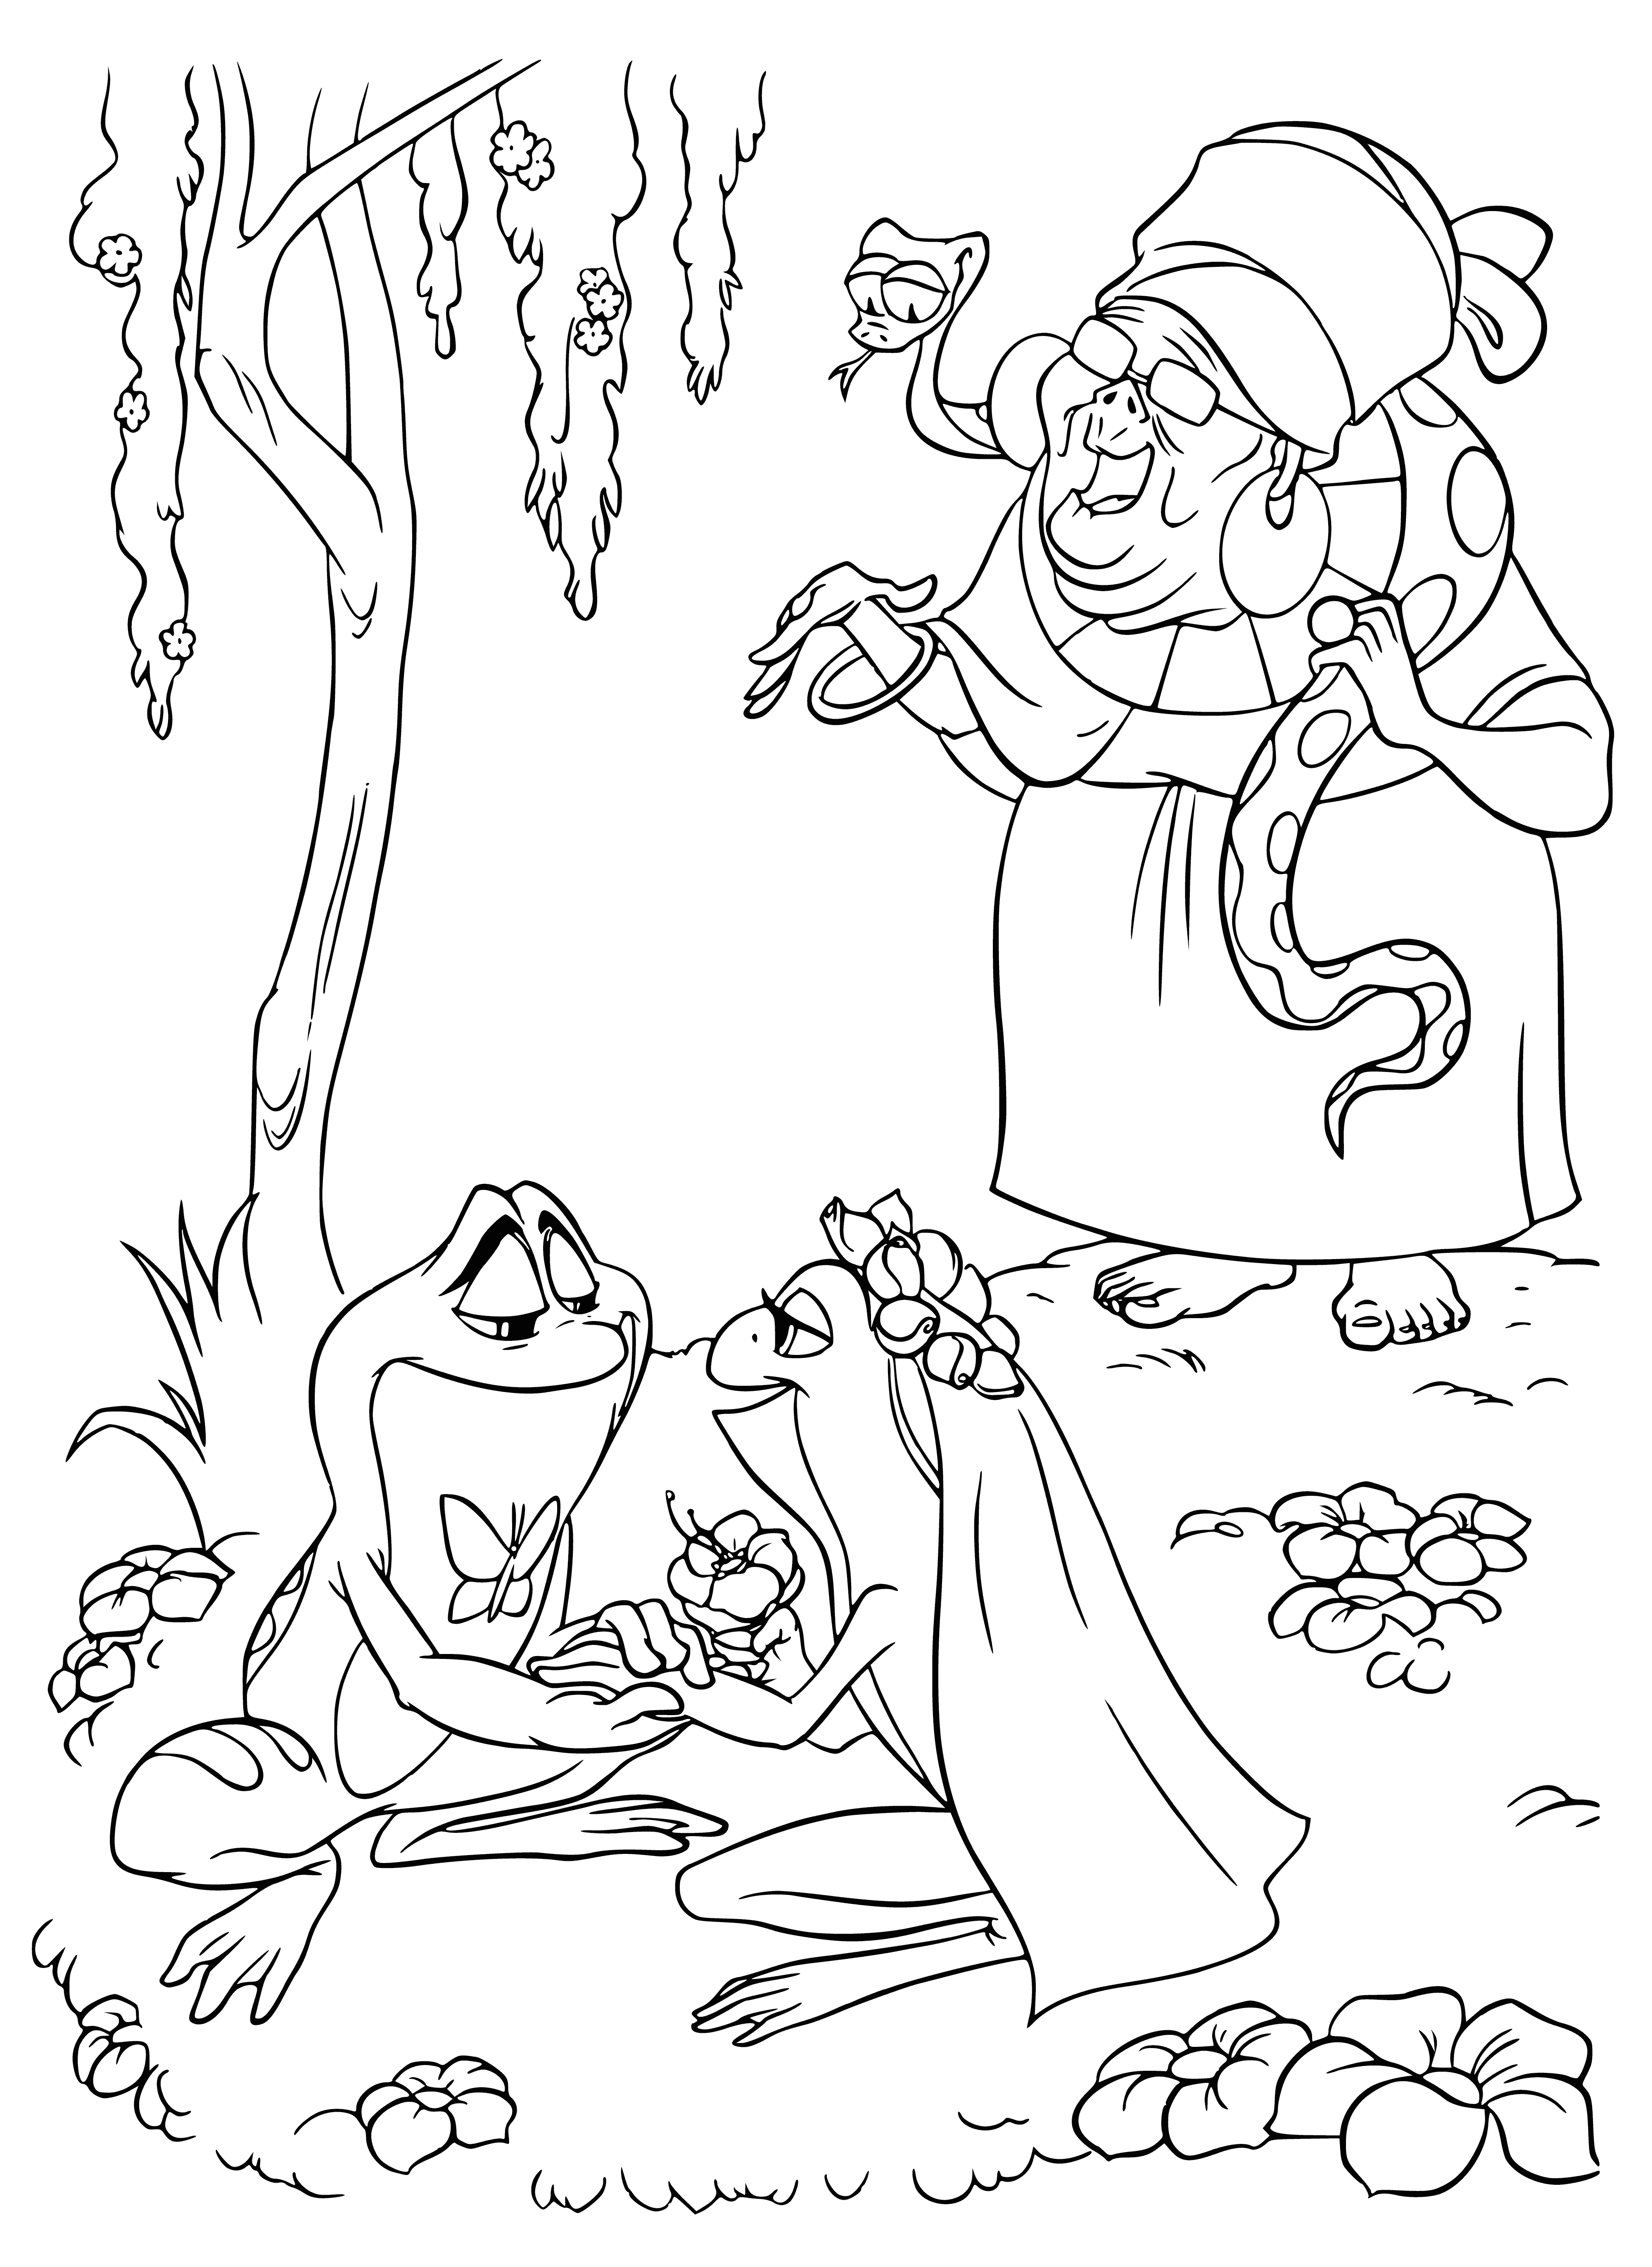 Frog wedding coloring page